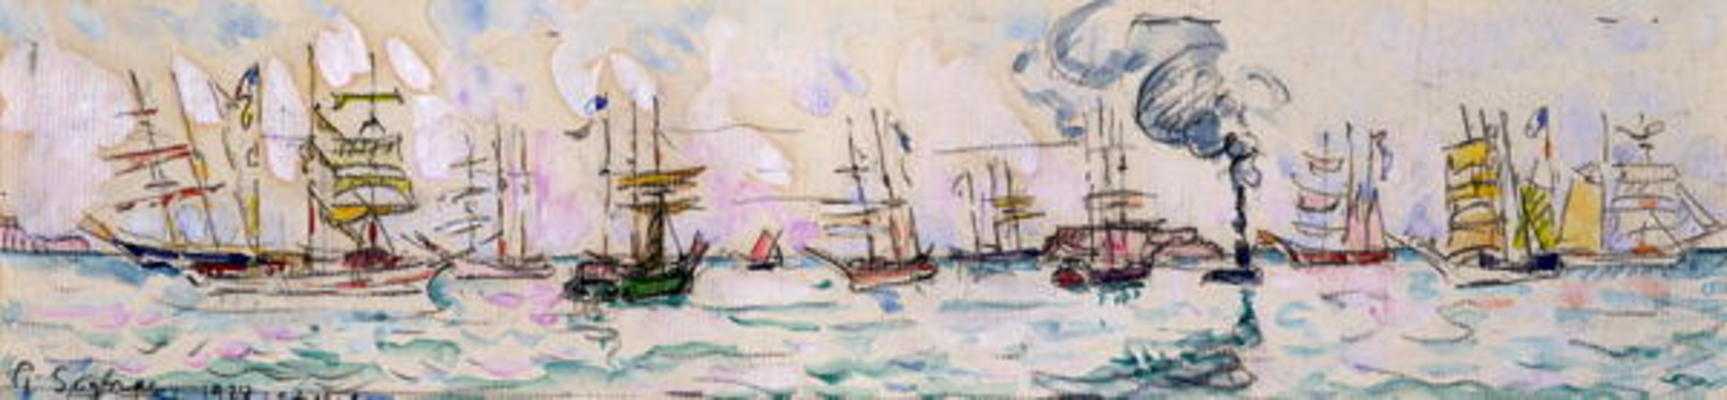 The Departure of the Fishing Trawlers to Newfoundland, 1928 (w/c on paper) van Paul Signac